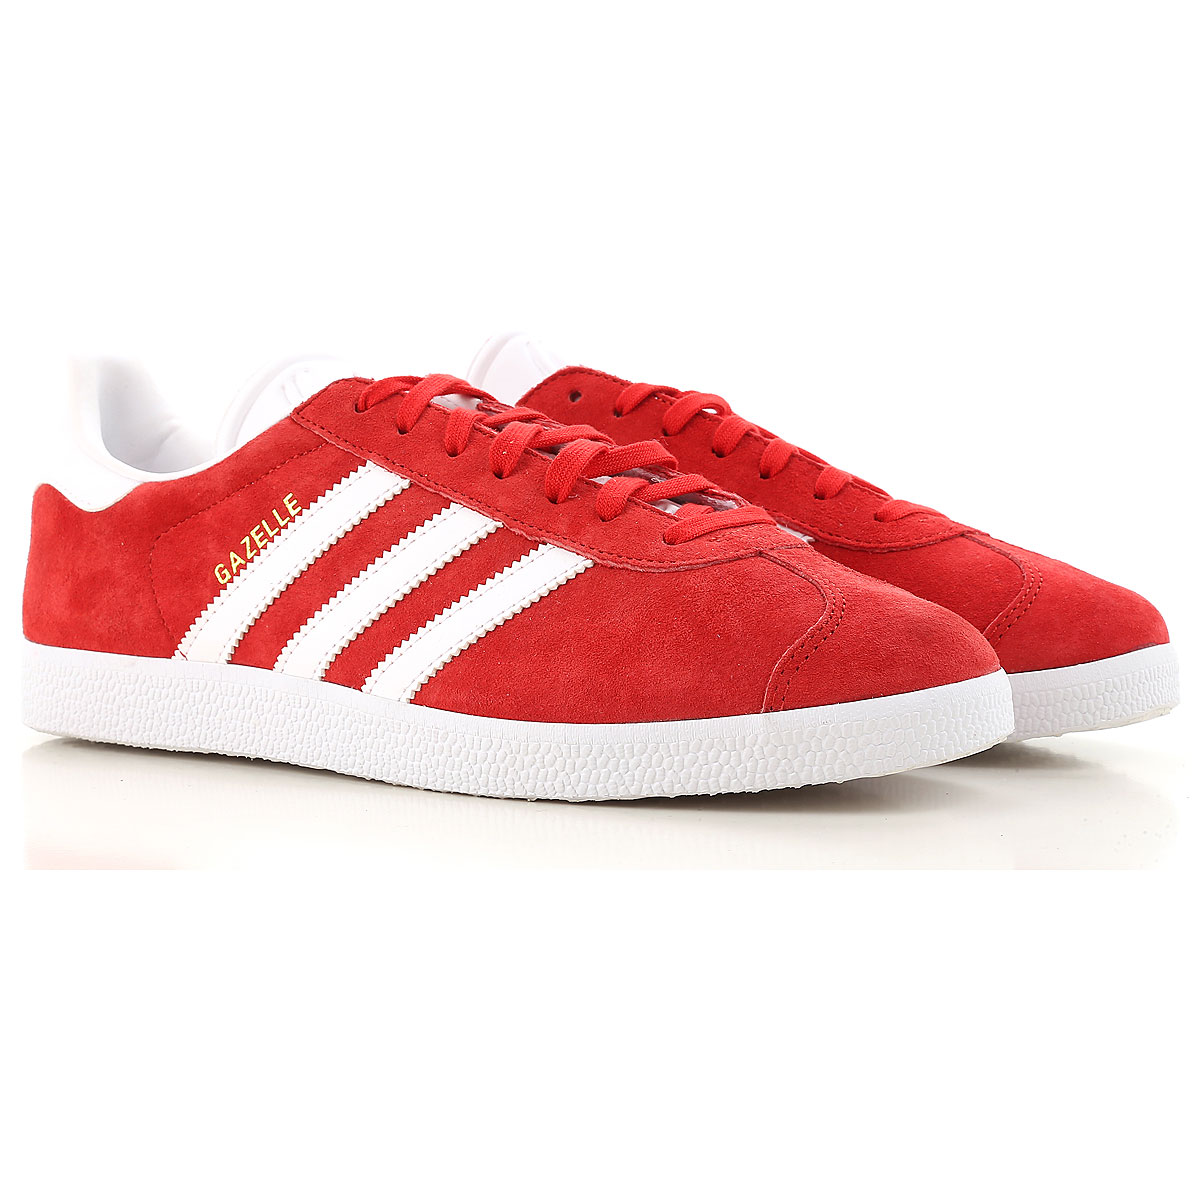 Mens Shoes Adidas, Style code: s76228-red-